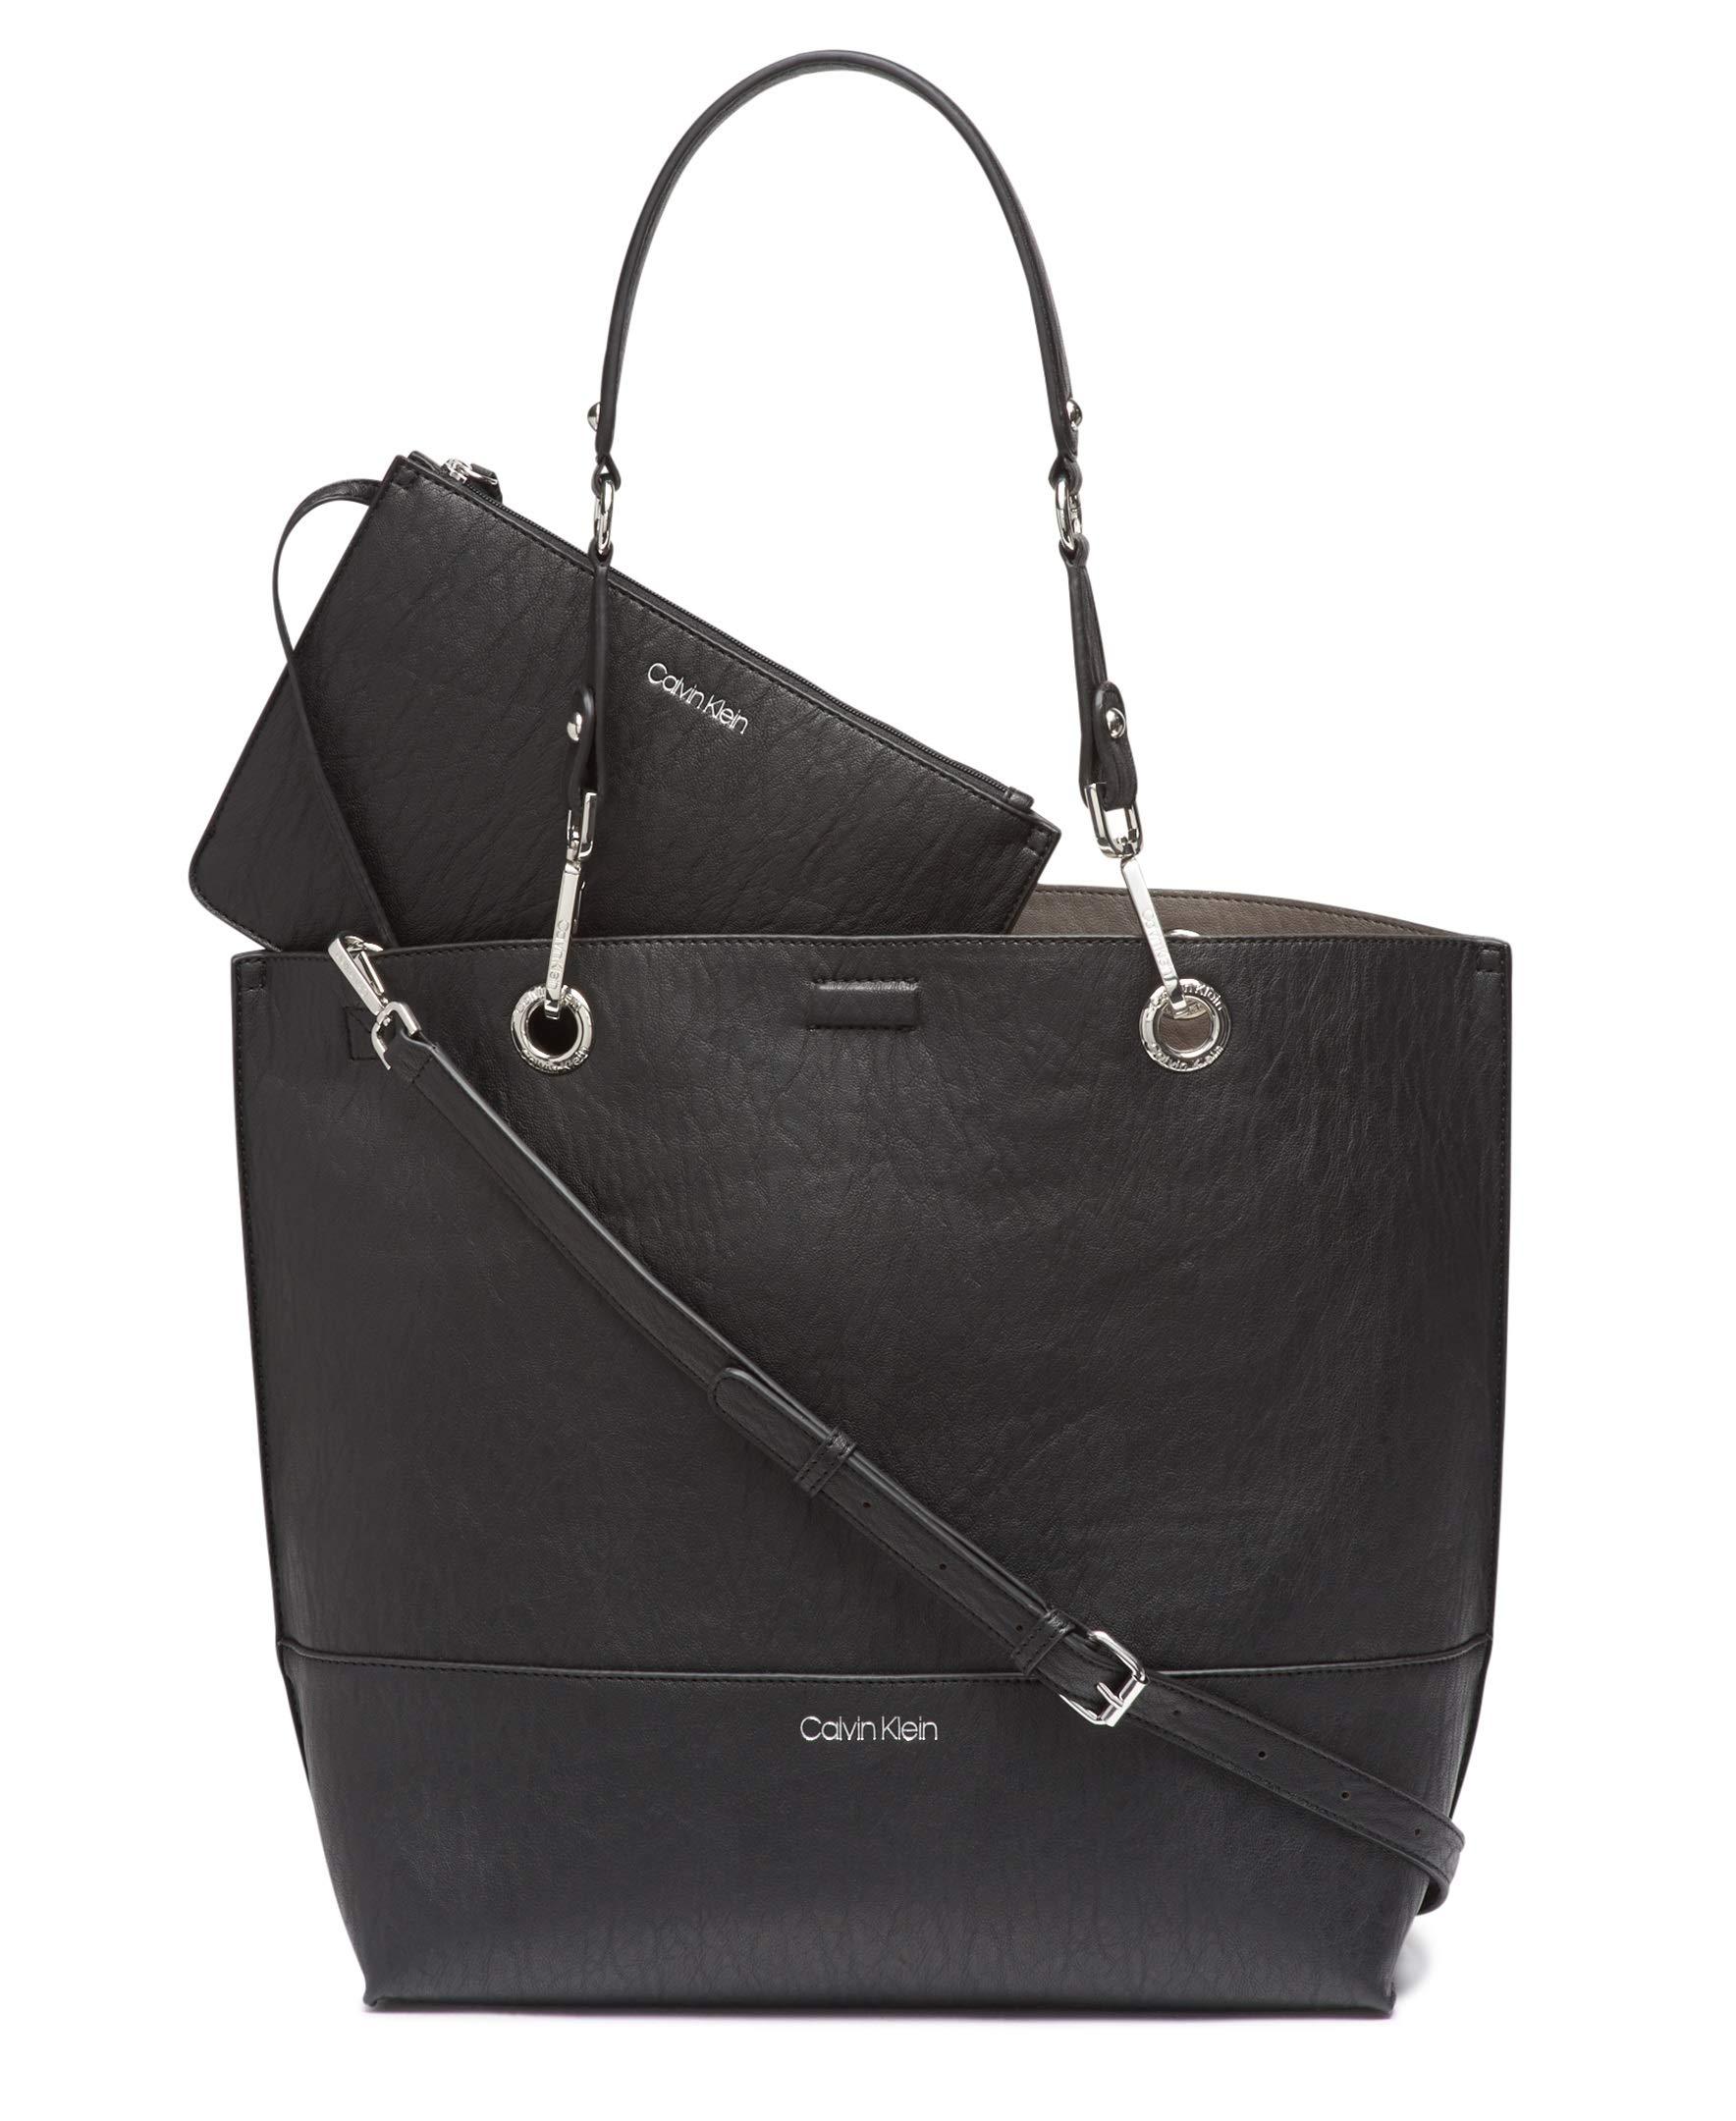 Calvin Klein Sonoma Reversible Novelty North/south Tote Bag in Black | Lyst